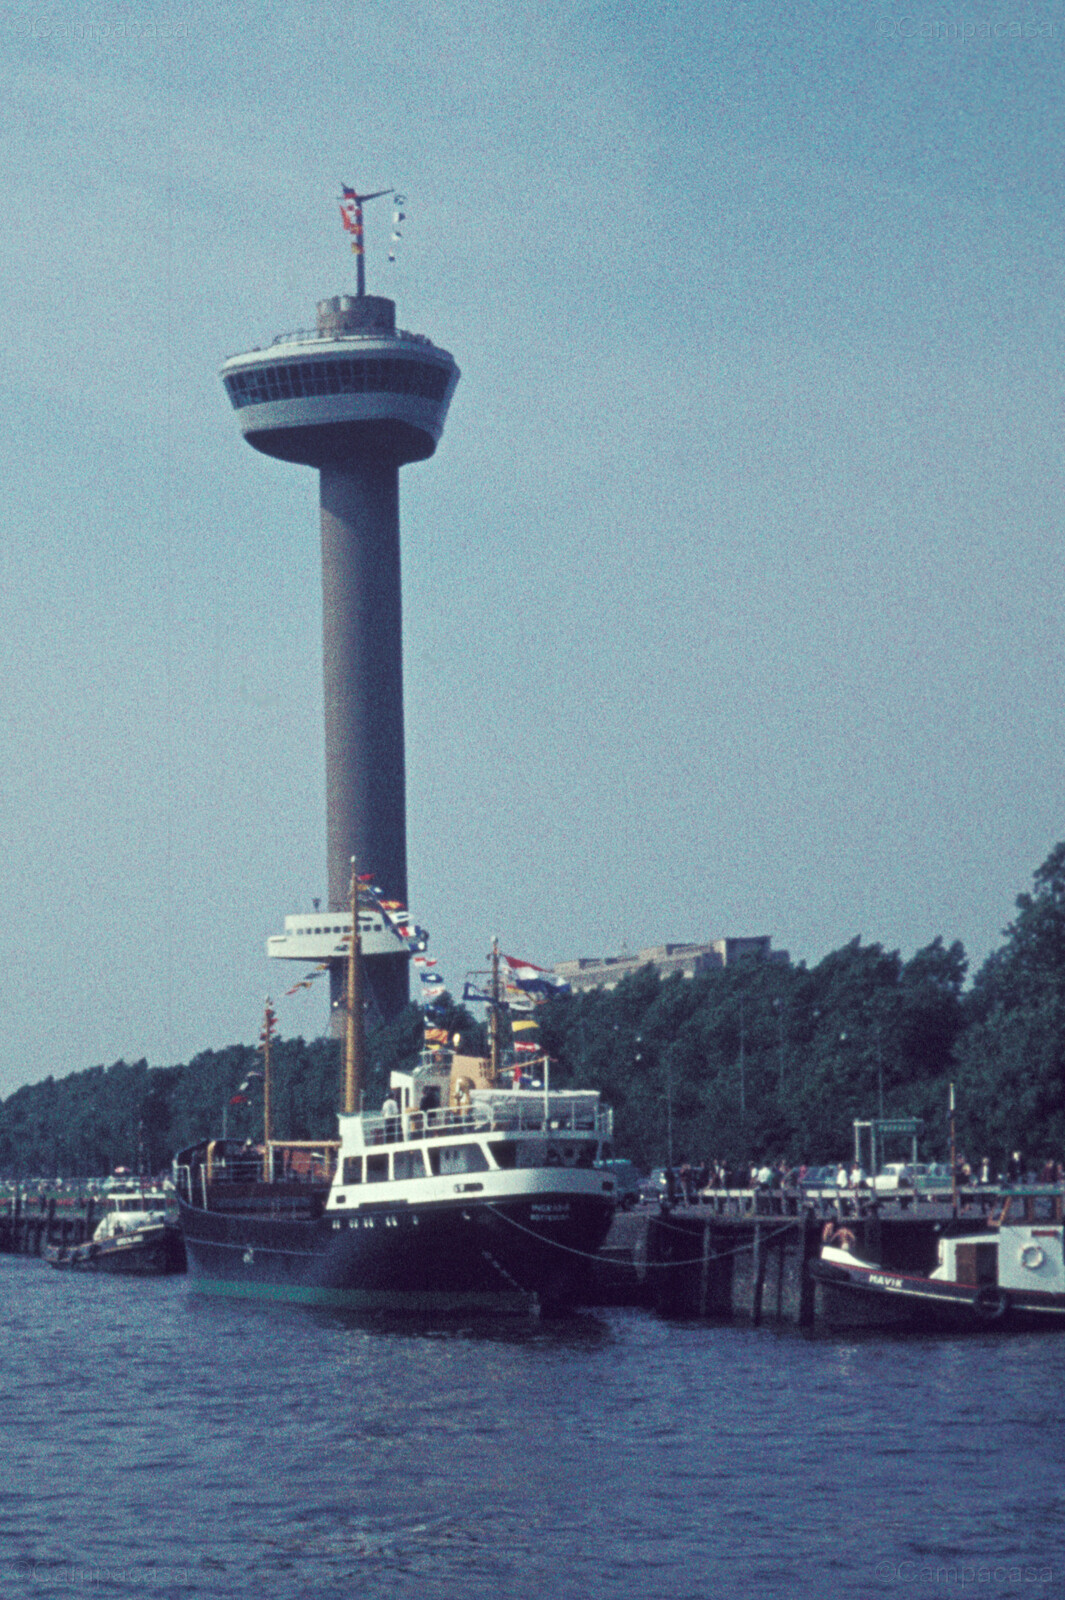 1964 - Rotterdam, Euromast and Parkhaven